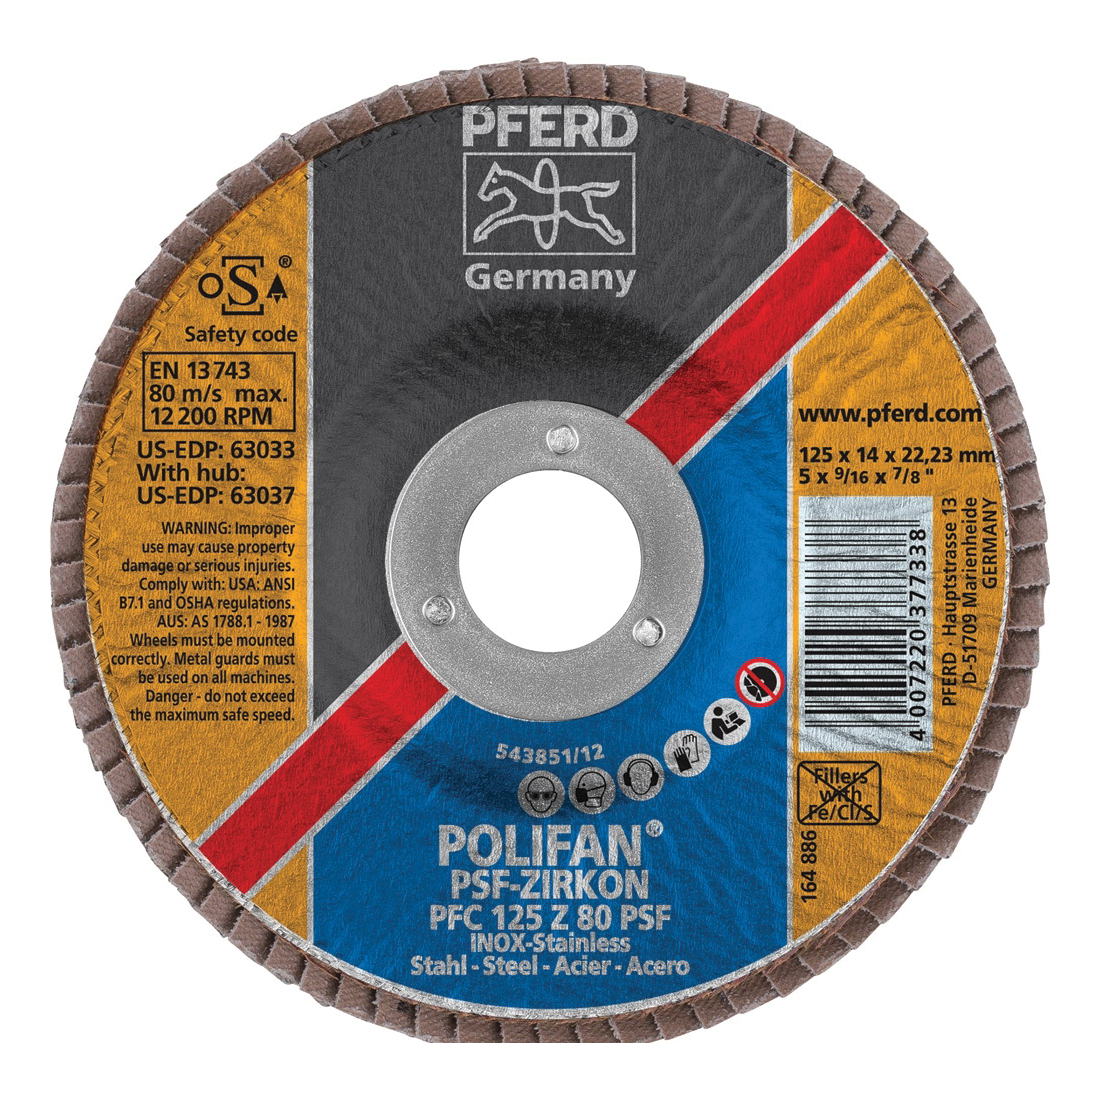 PFERD Polifan® 63033 Universal Line PSF-Z Unthreaded Coated Abrasive Flap Disc, 5 in Dia, 7/8 in Center Hole, 80 Grit, Zirconia Alumina Abrasive, Type 29 Conical Disc